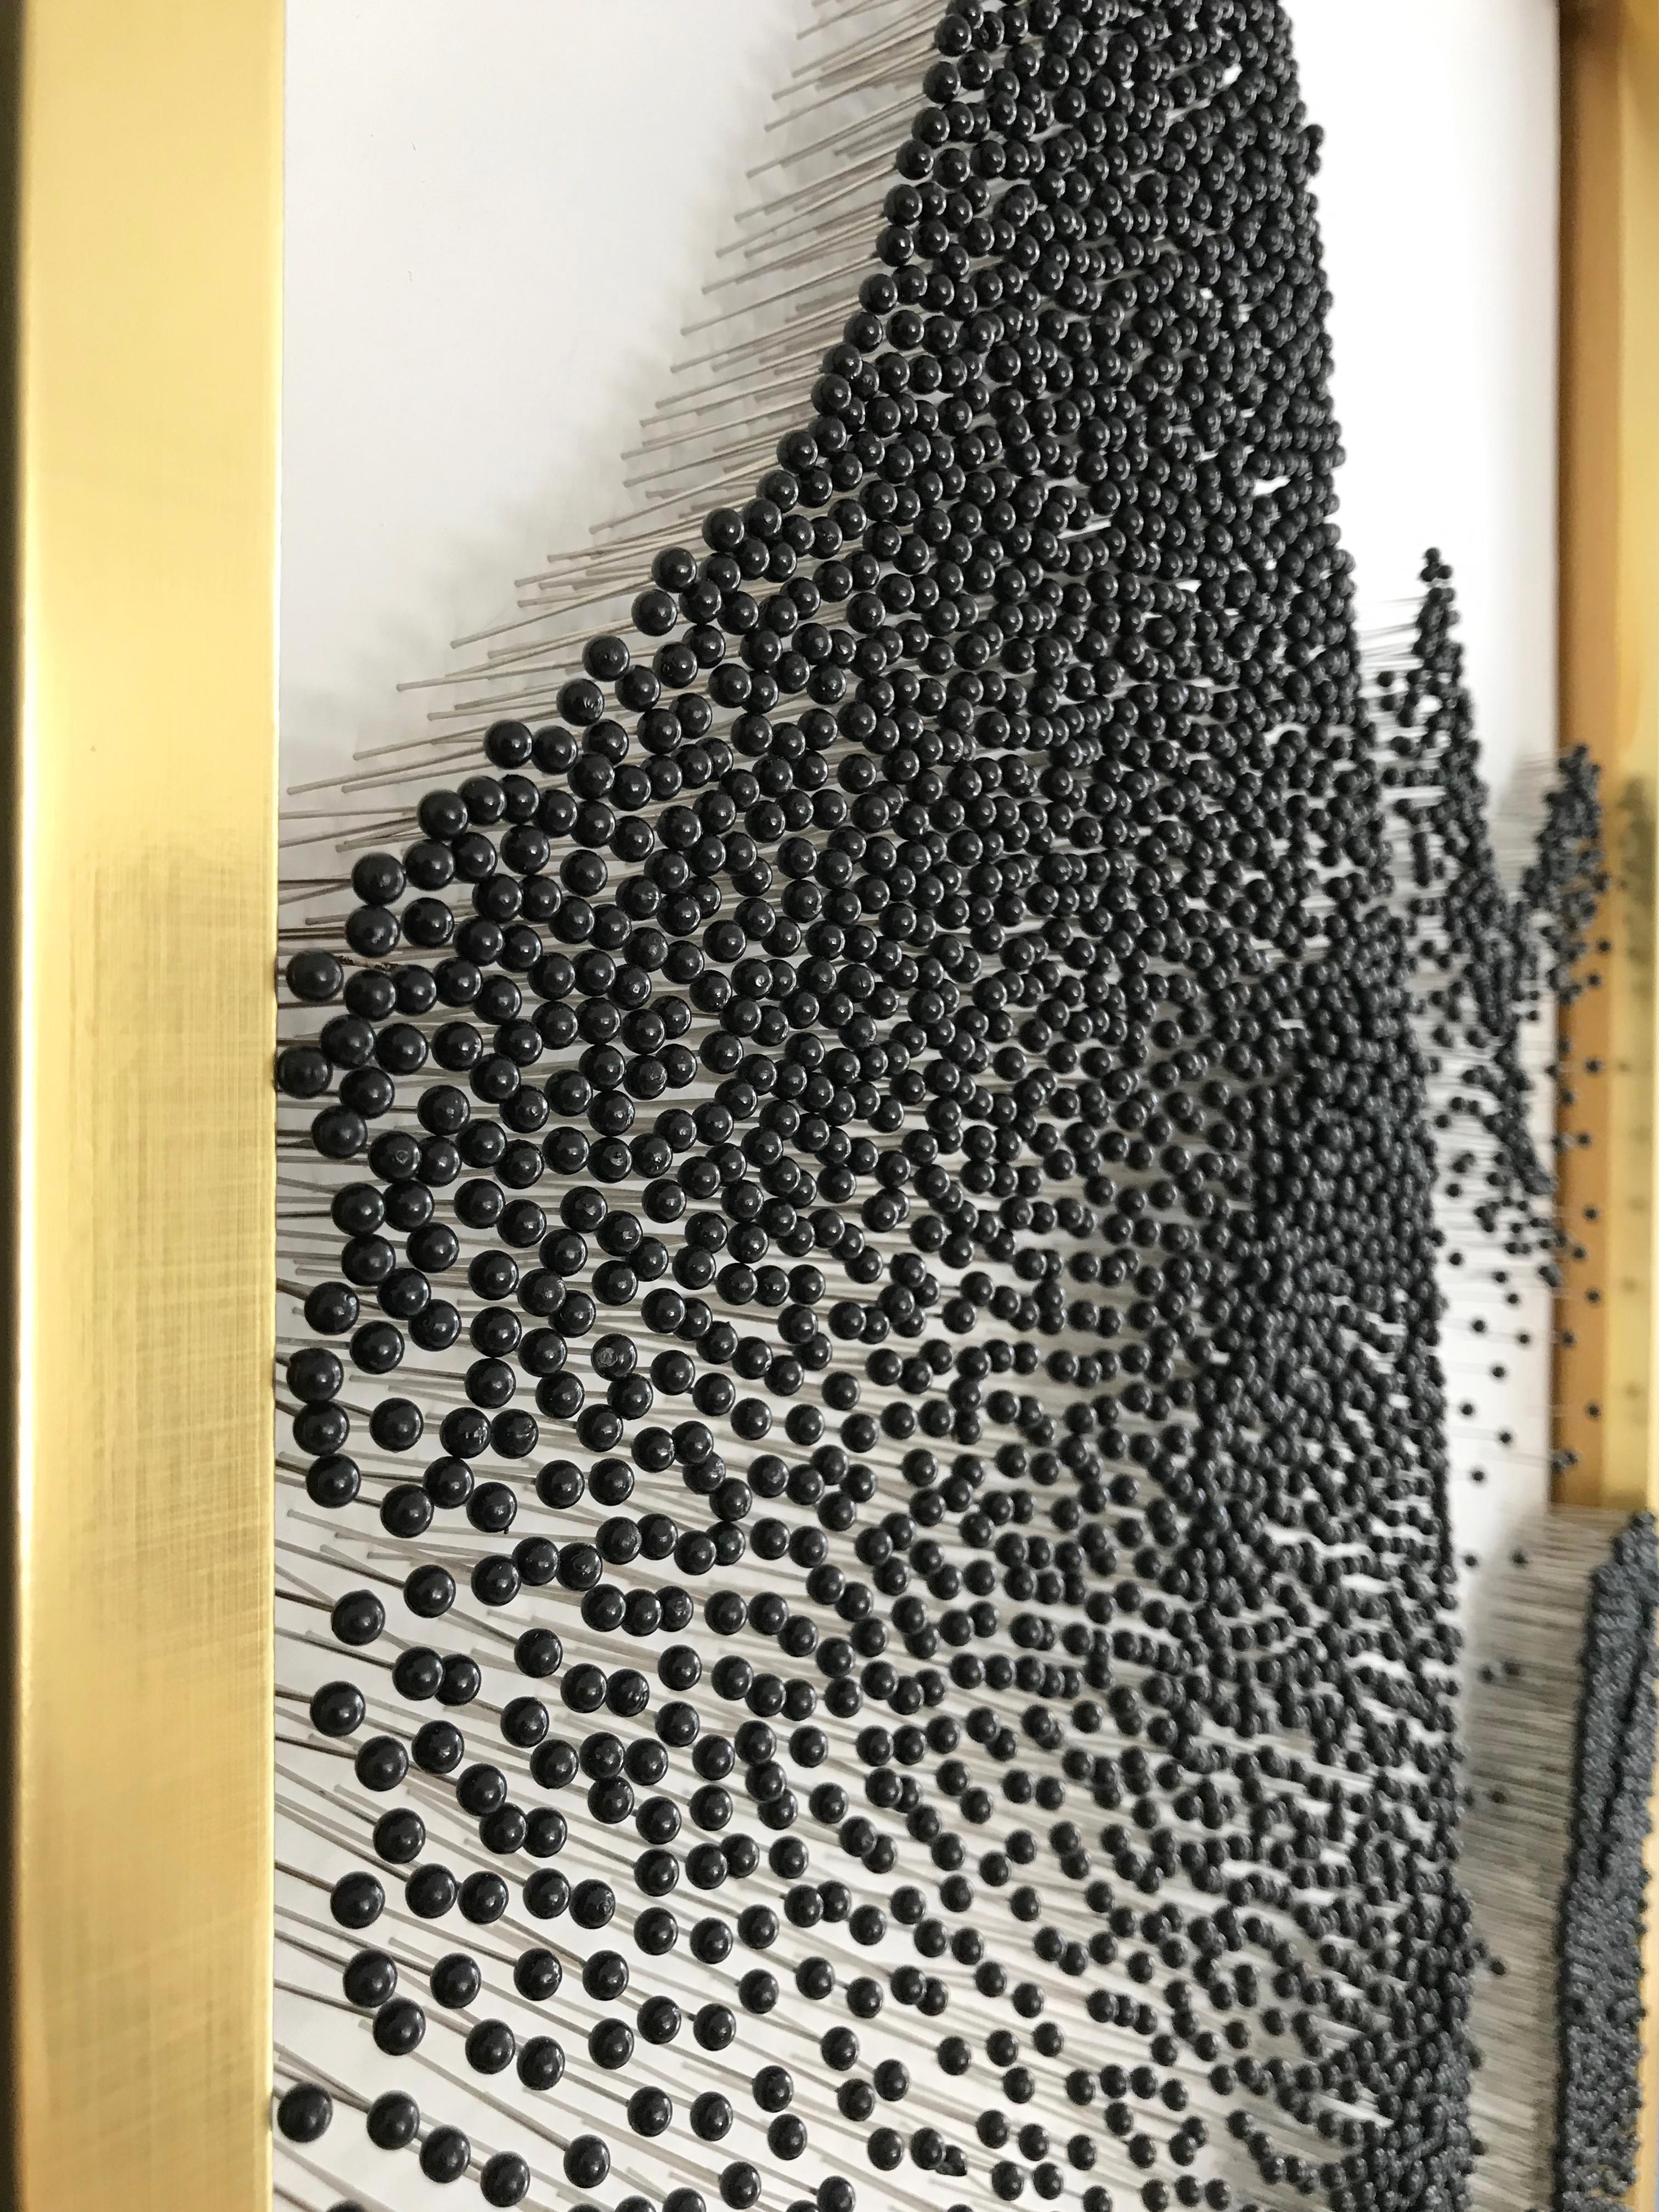 This beautiful abstract sculpture on framed canvass has a 3D impact, for the pins on it give it visual movement and perspective. It is an elegant piece perfect for decorating spaces delicately. It is not heavy at all and is easy to install,  (metal